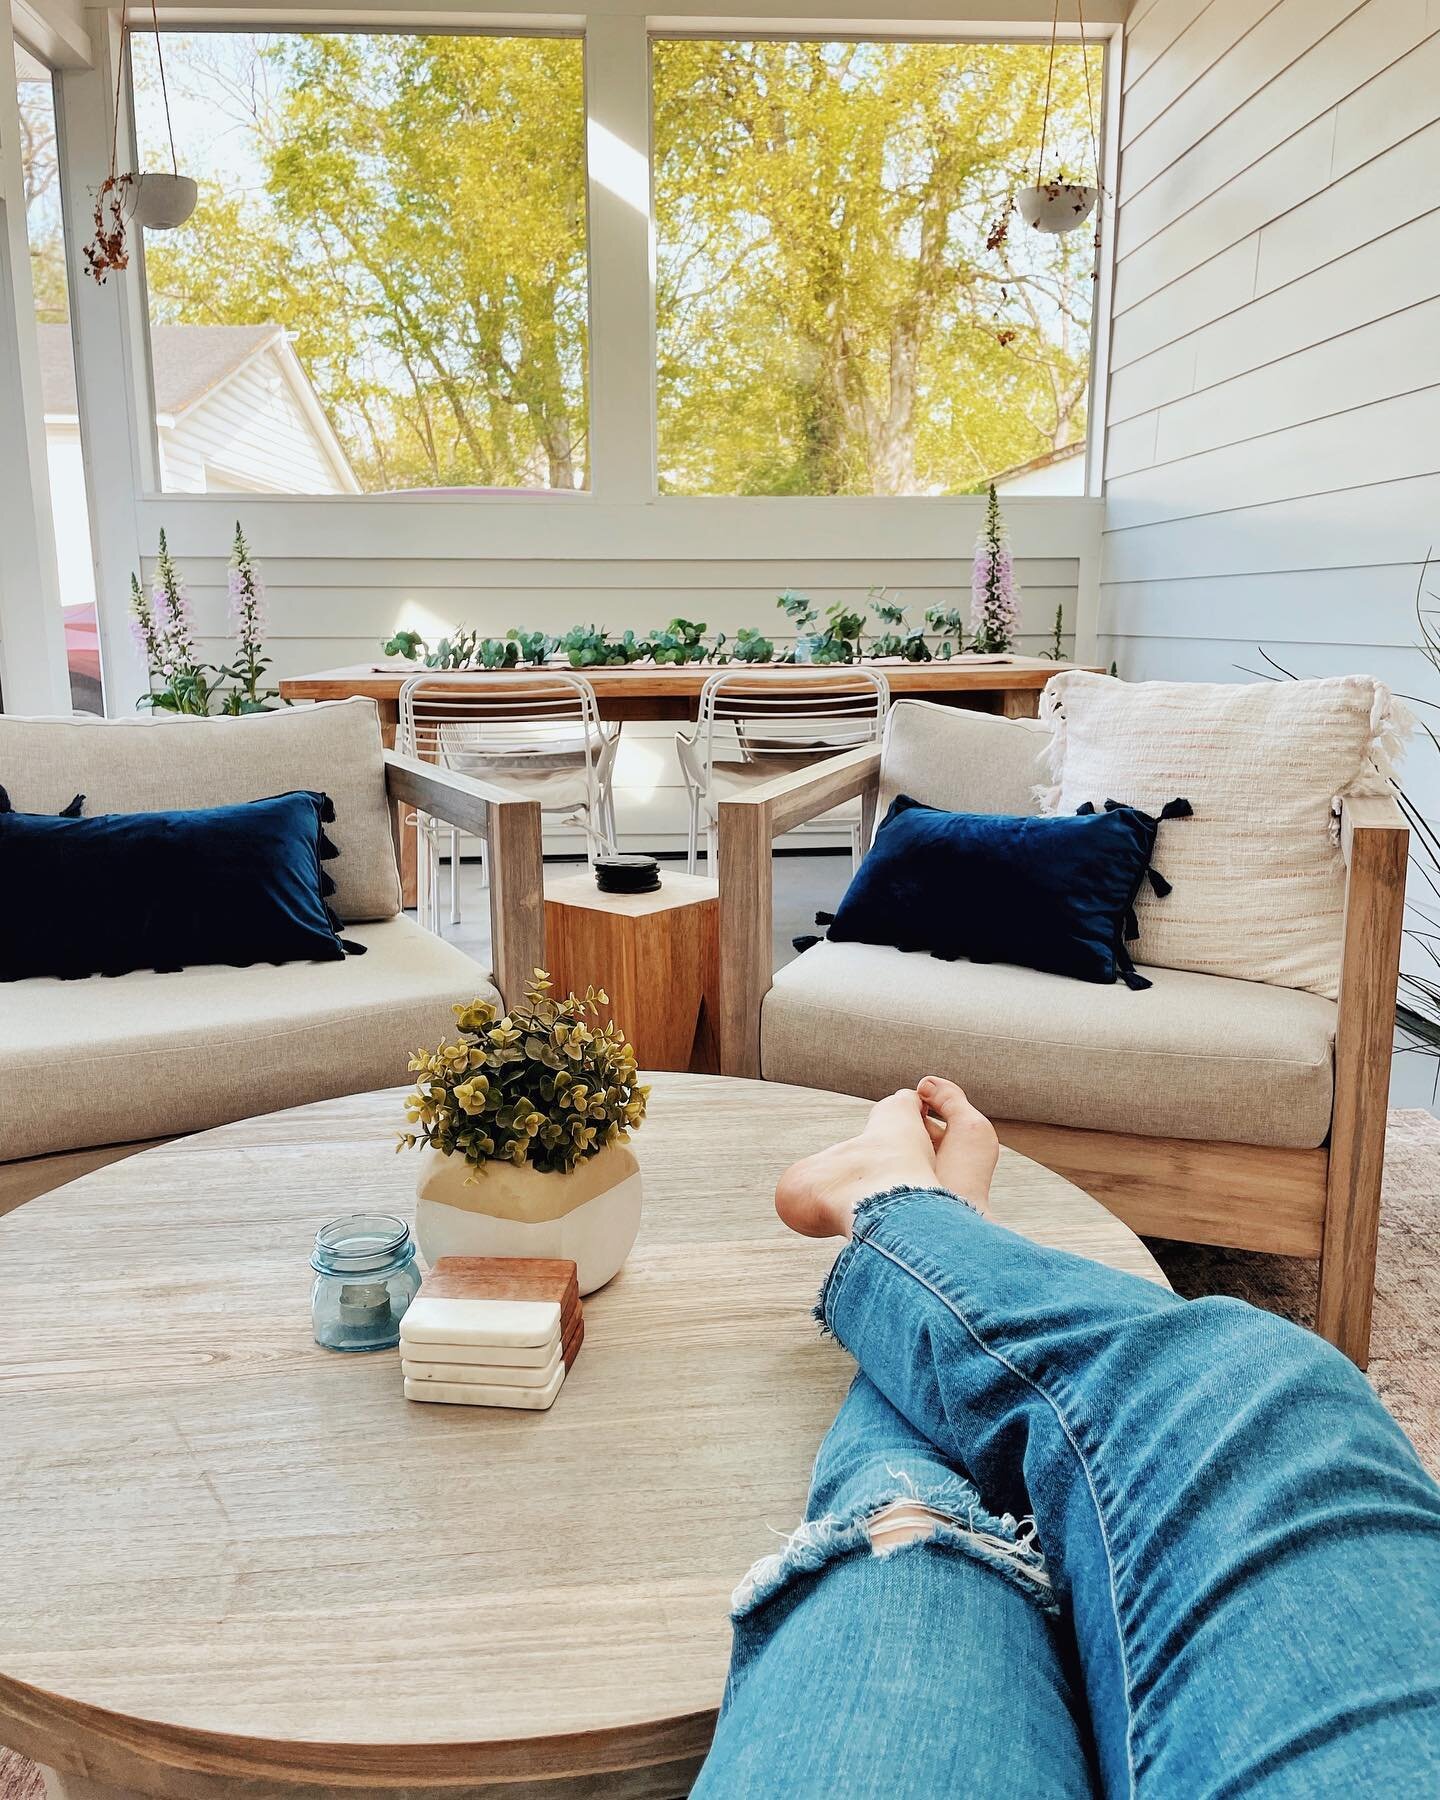 This patio was made for those perfect spring days, with the sweet floral scents hanging in the cool air, and the gentle breezes ruffling up the brand new leaves on the nearby trees. 

Now I have a baby girl in one arm, a pup snuggled up next to me, a